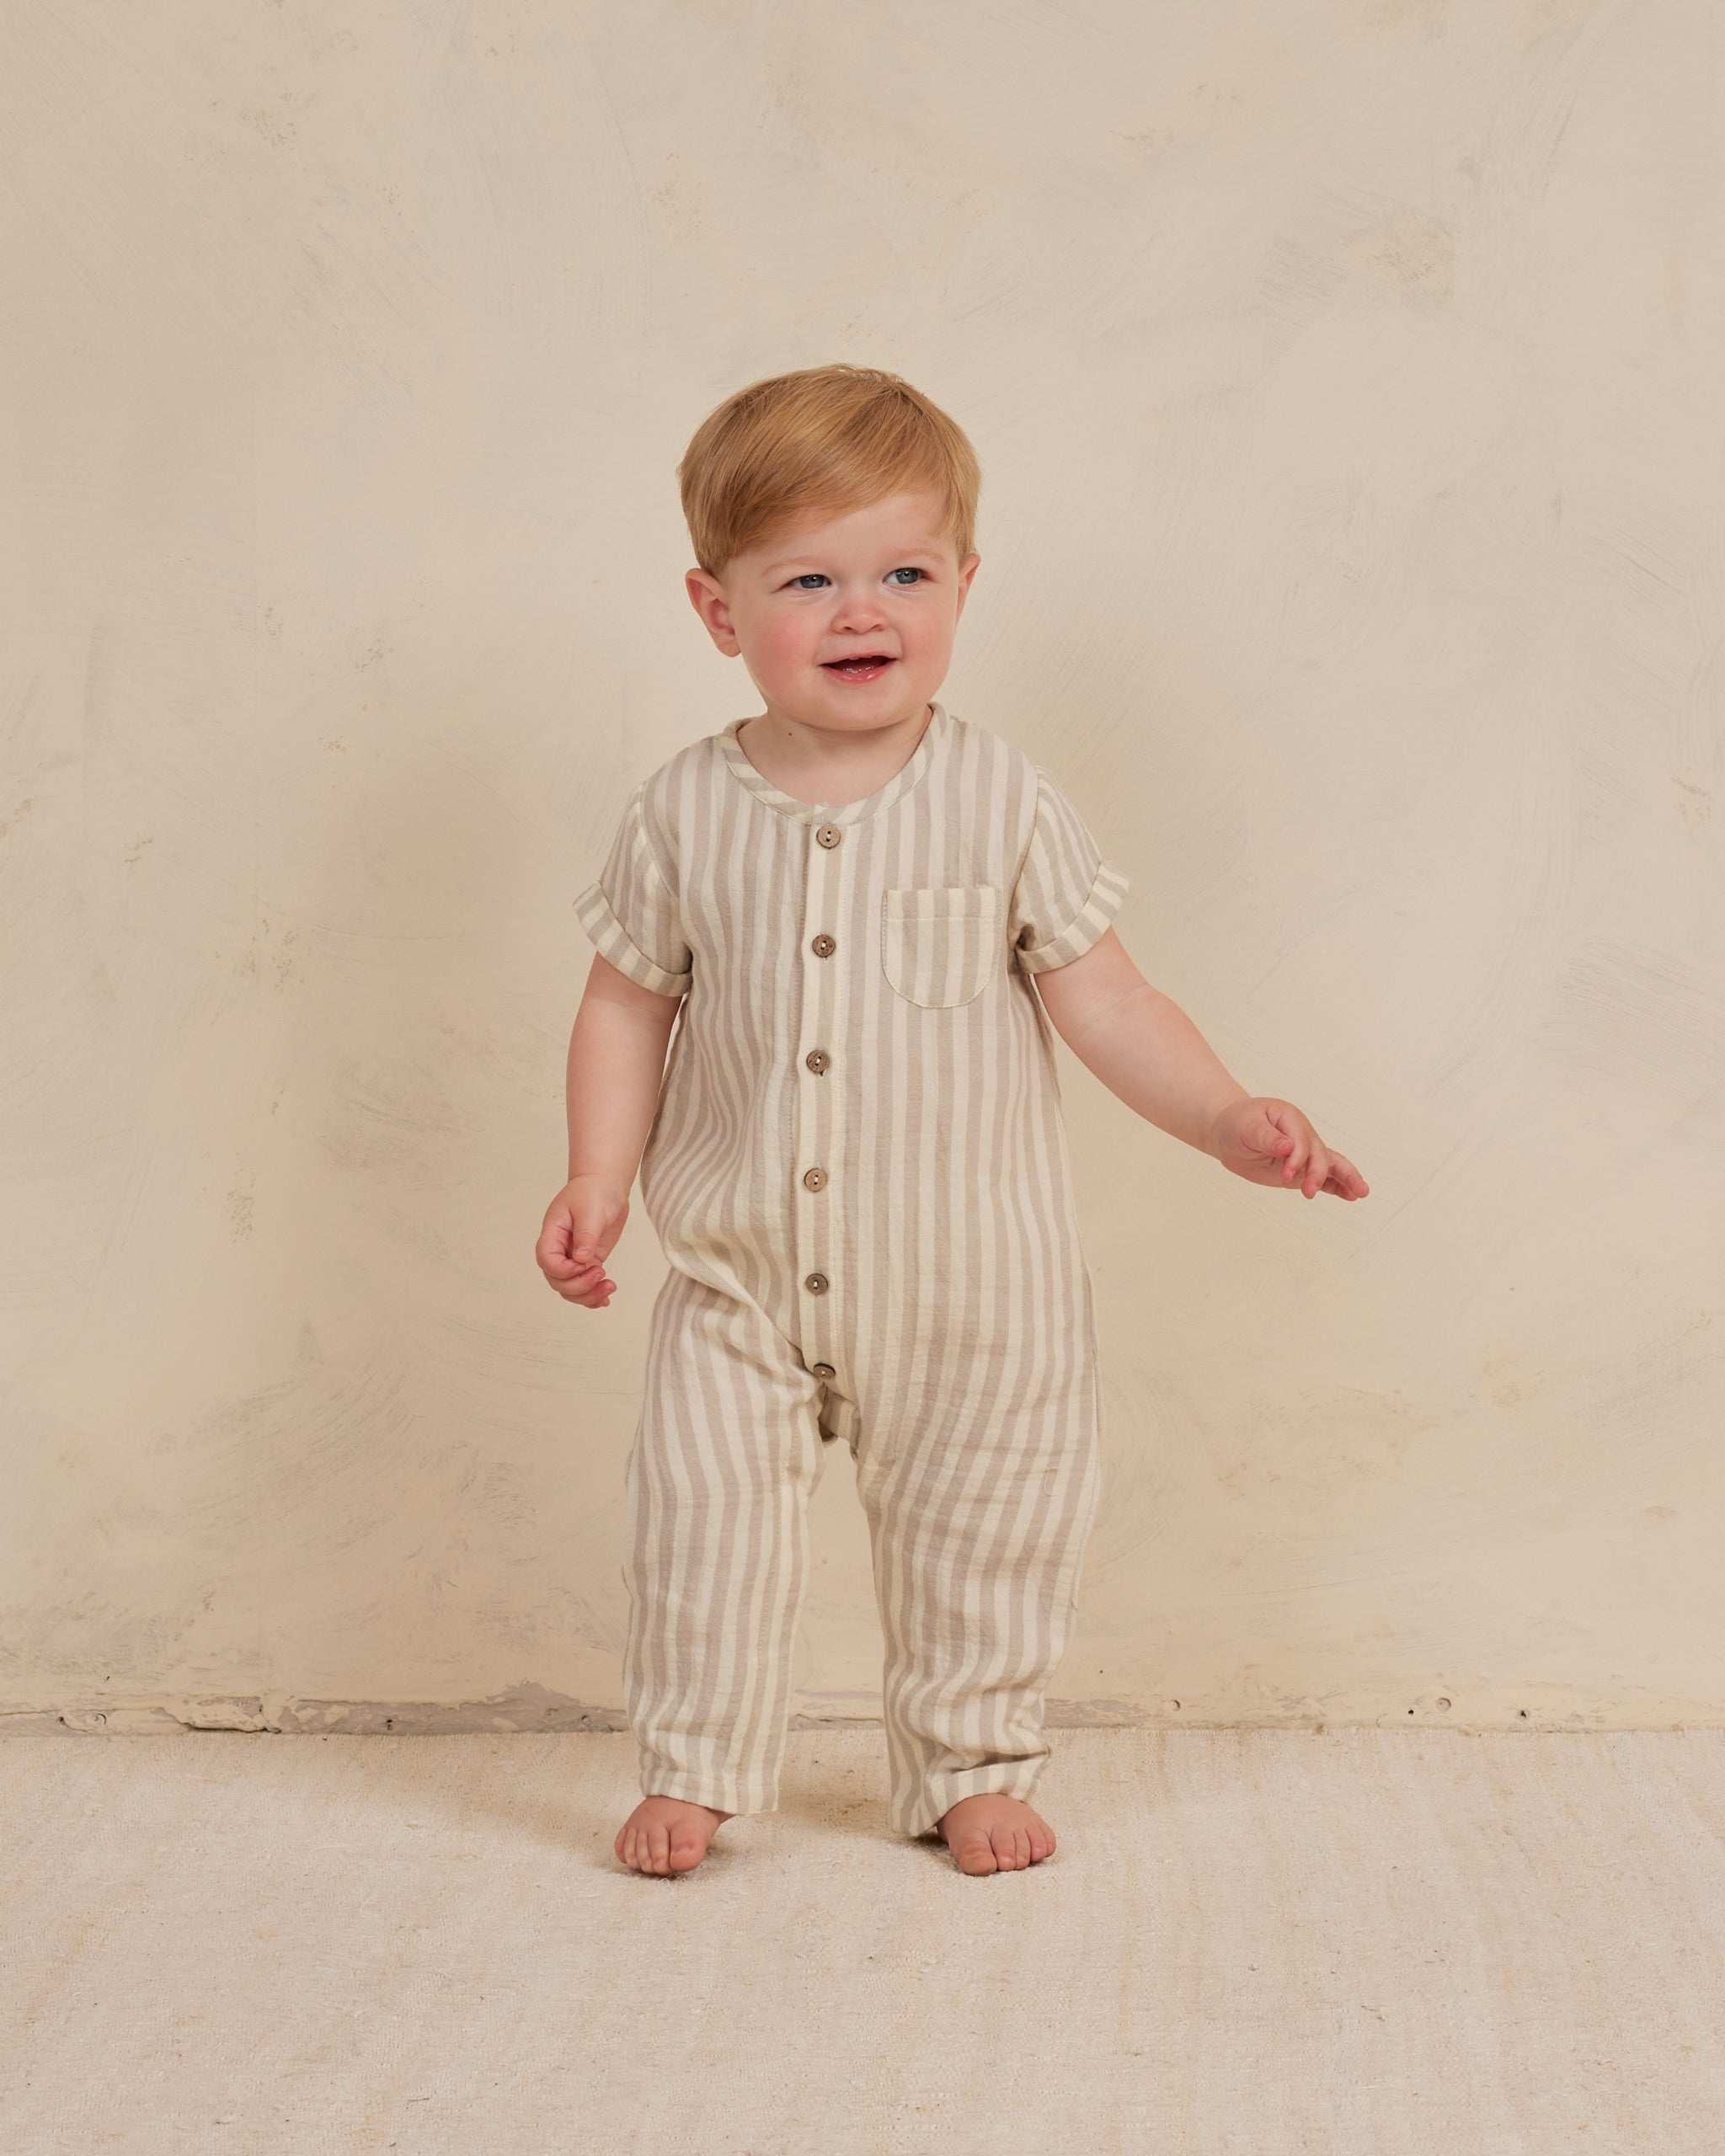 Charlie Jumpsuit || Ash Stripe - Rylee + Cru | Kids Clothes | Trendy Baby Clothes | Modern Infant Outfits |